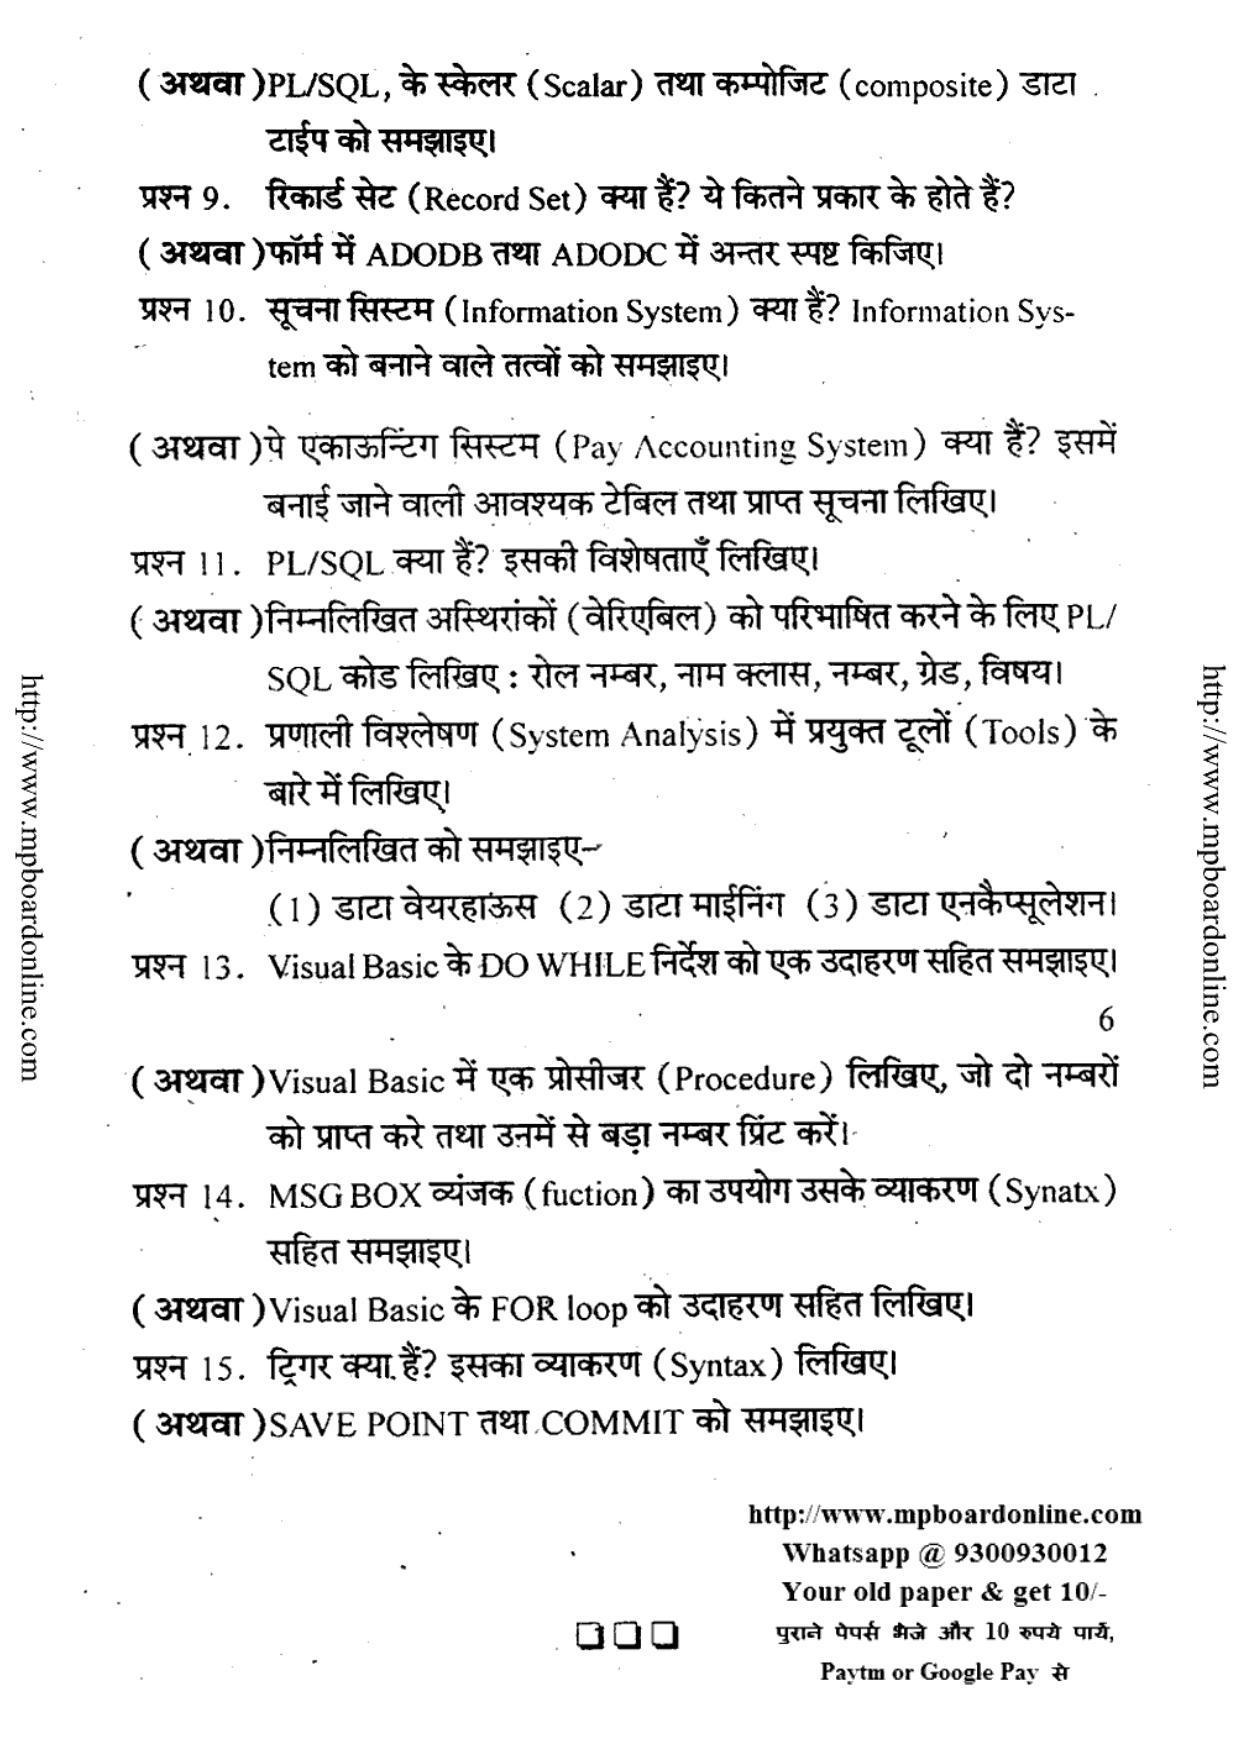 MP Board Class 12 Informatics Practices 2010 Question Paper - Page 3